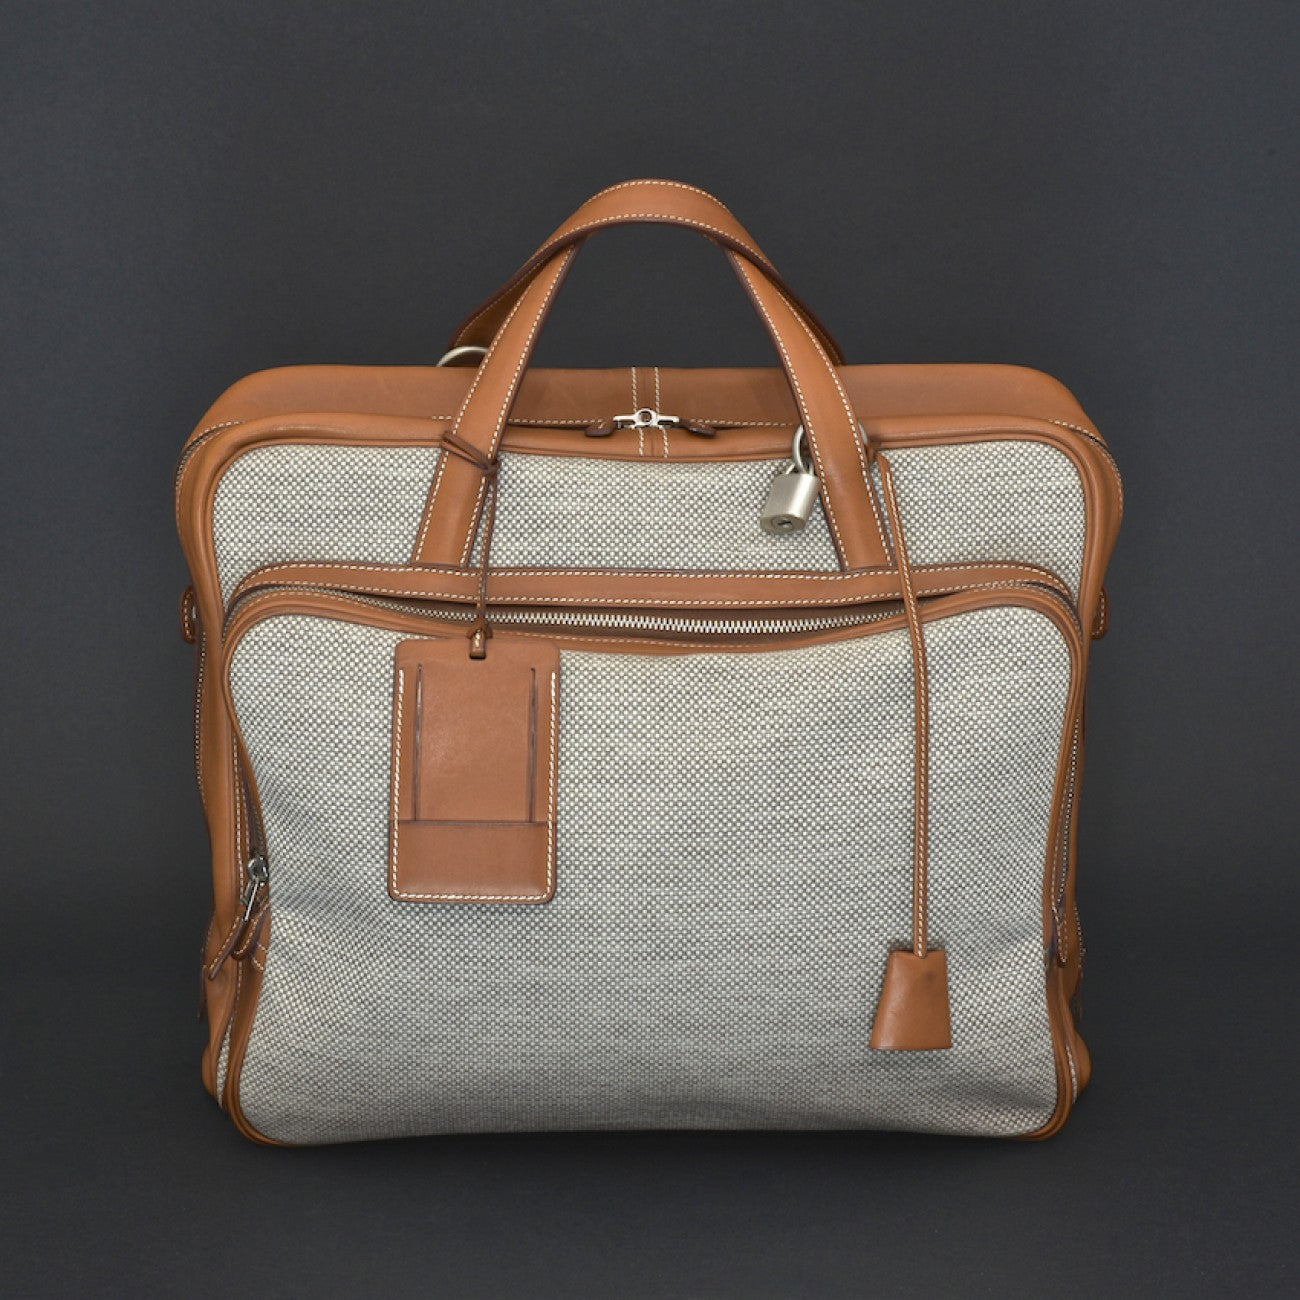 Disappear Here: Hermes Caleche Express Luggage Set For 2012.